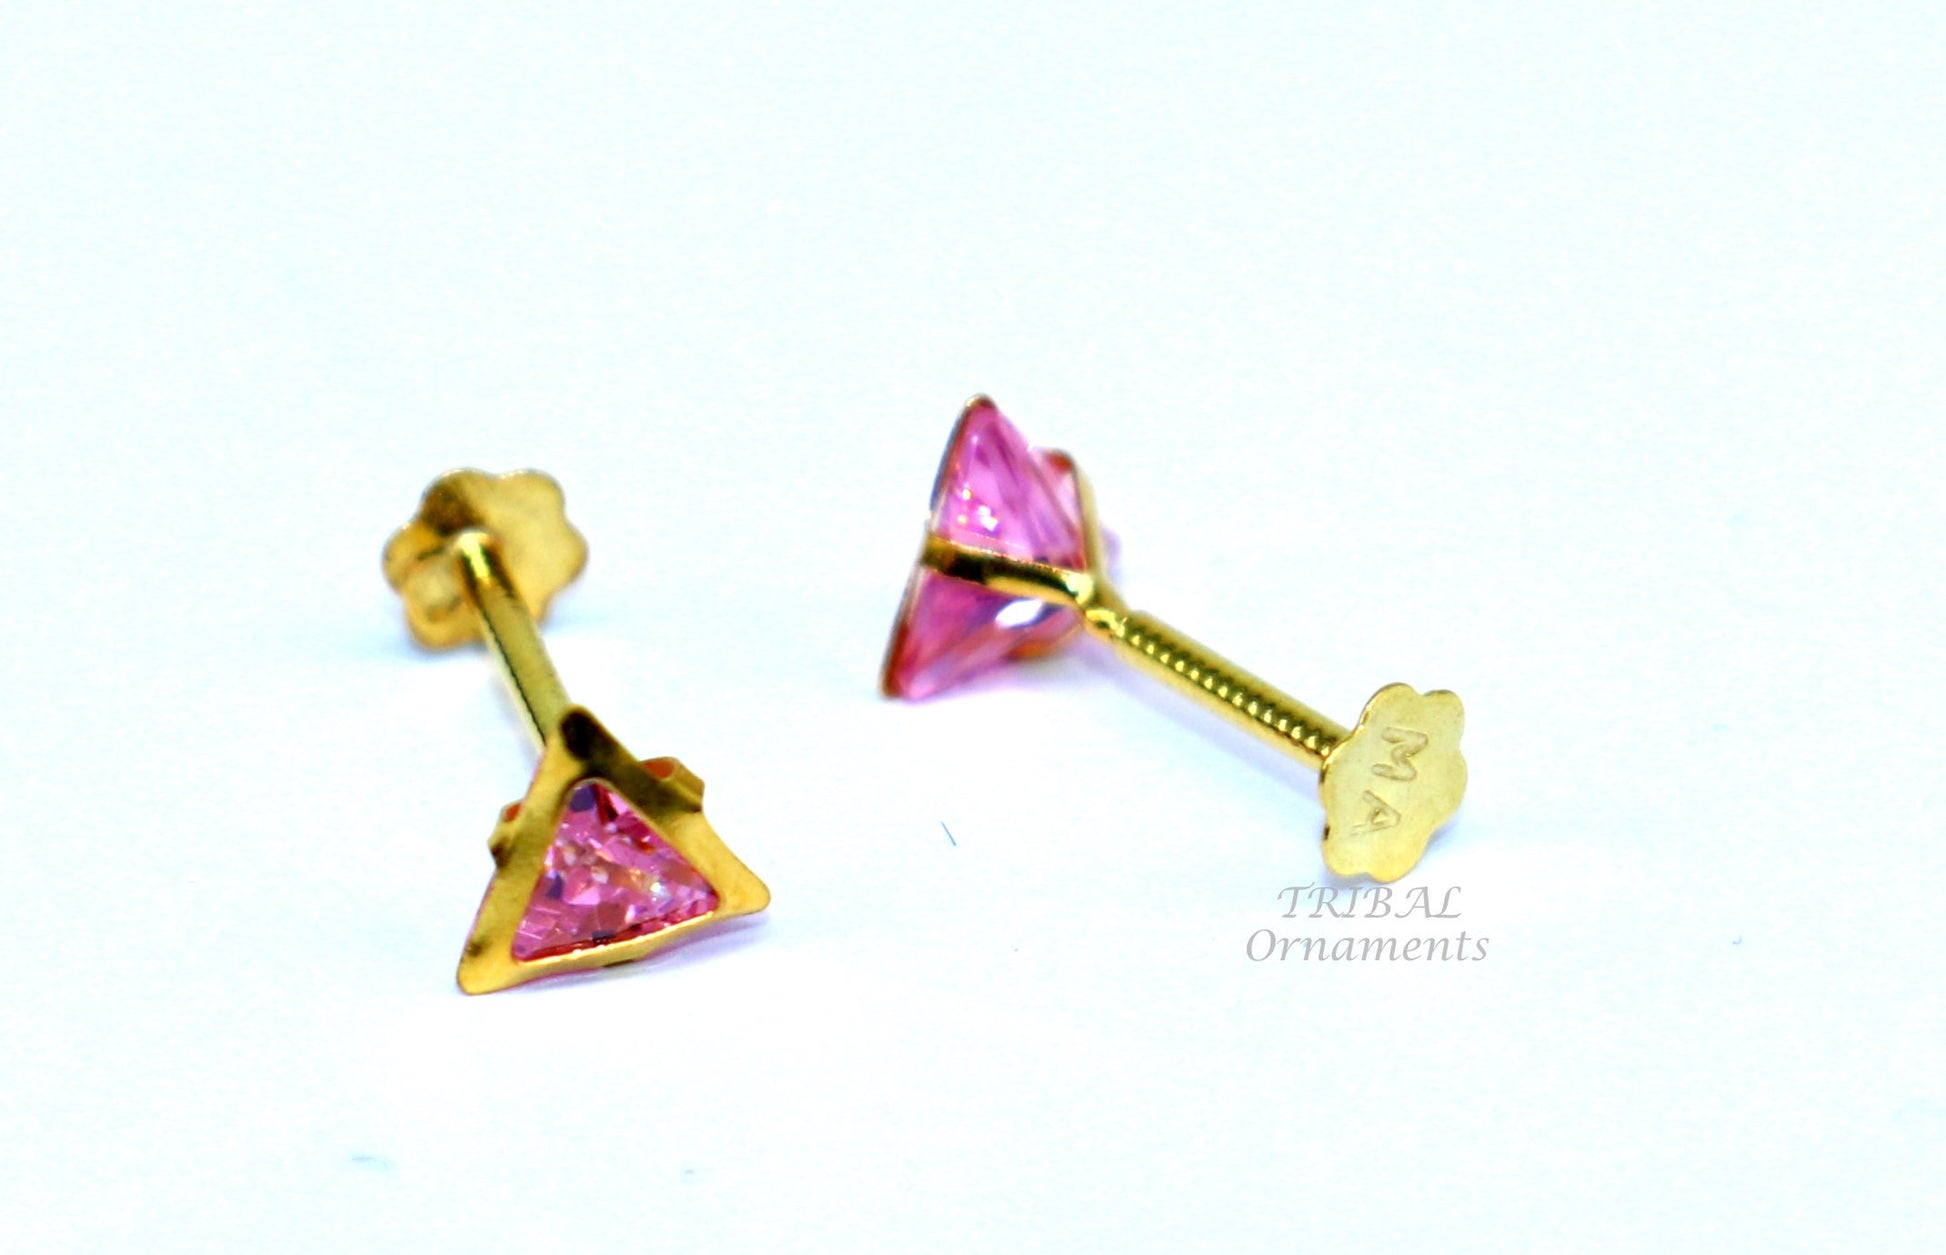 4mm tiny single pink stone handmade 18kt yellow gold combo jewelry we can use as stud or nose stud , baby stud cartilage jewelry er159 - TRIBAL ORNAMENTS